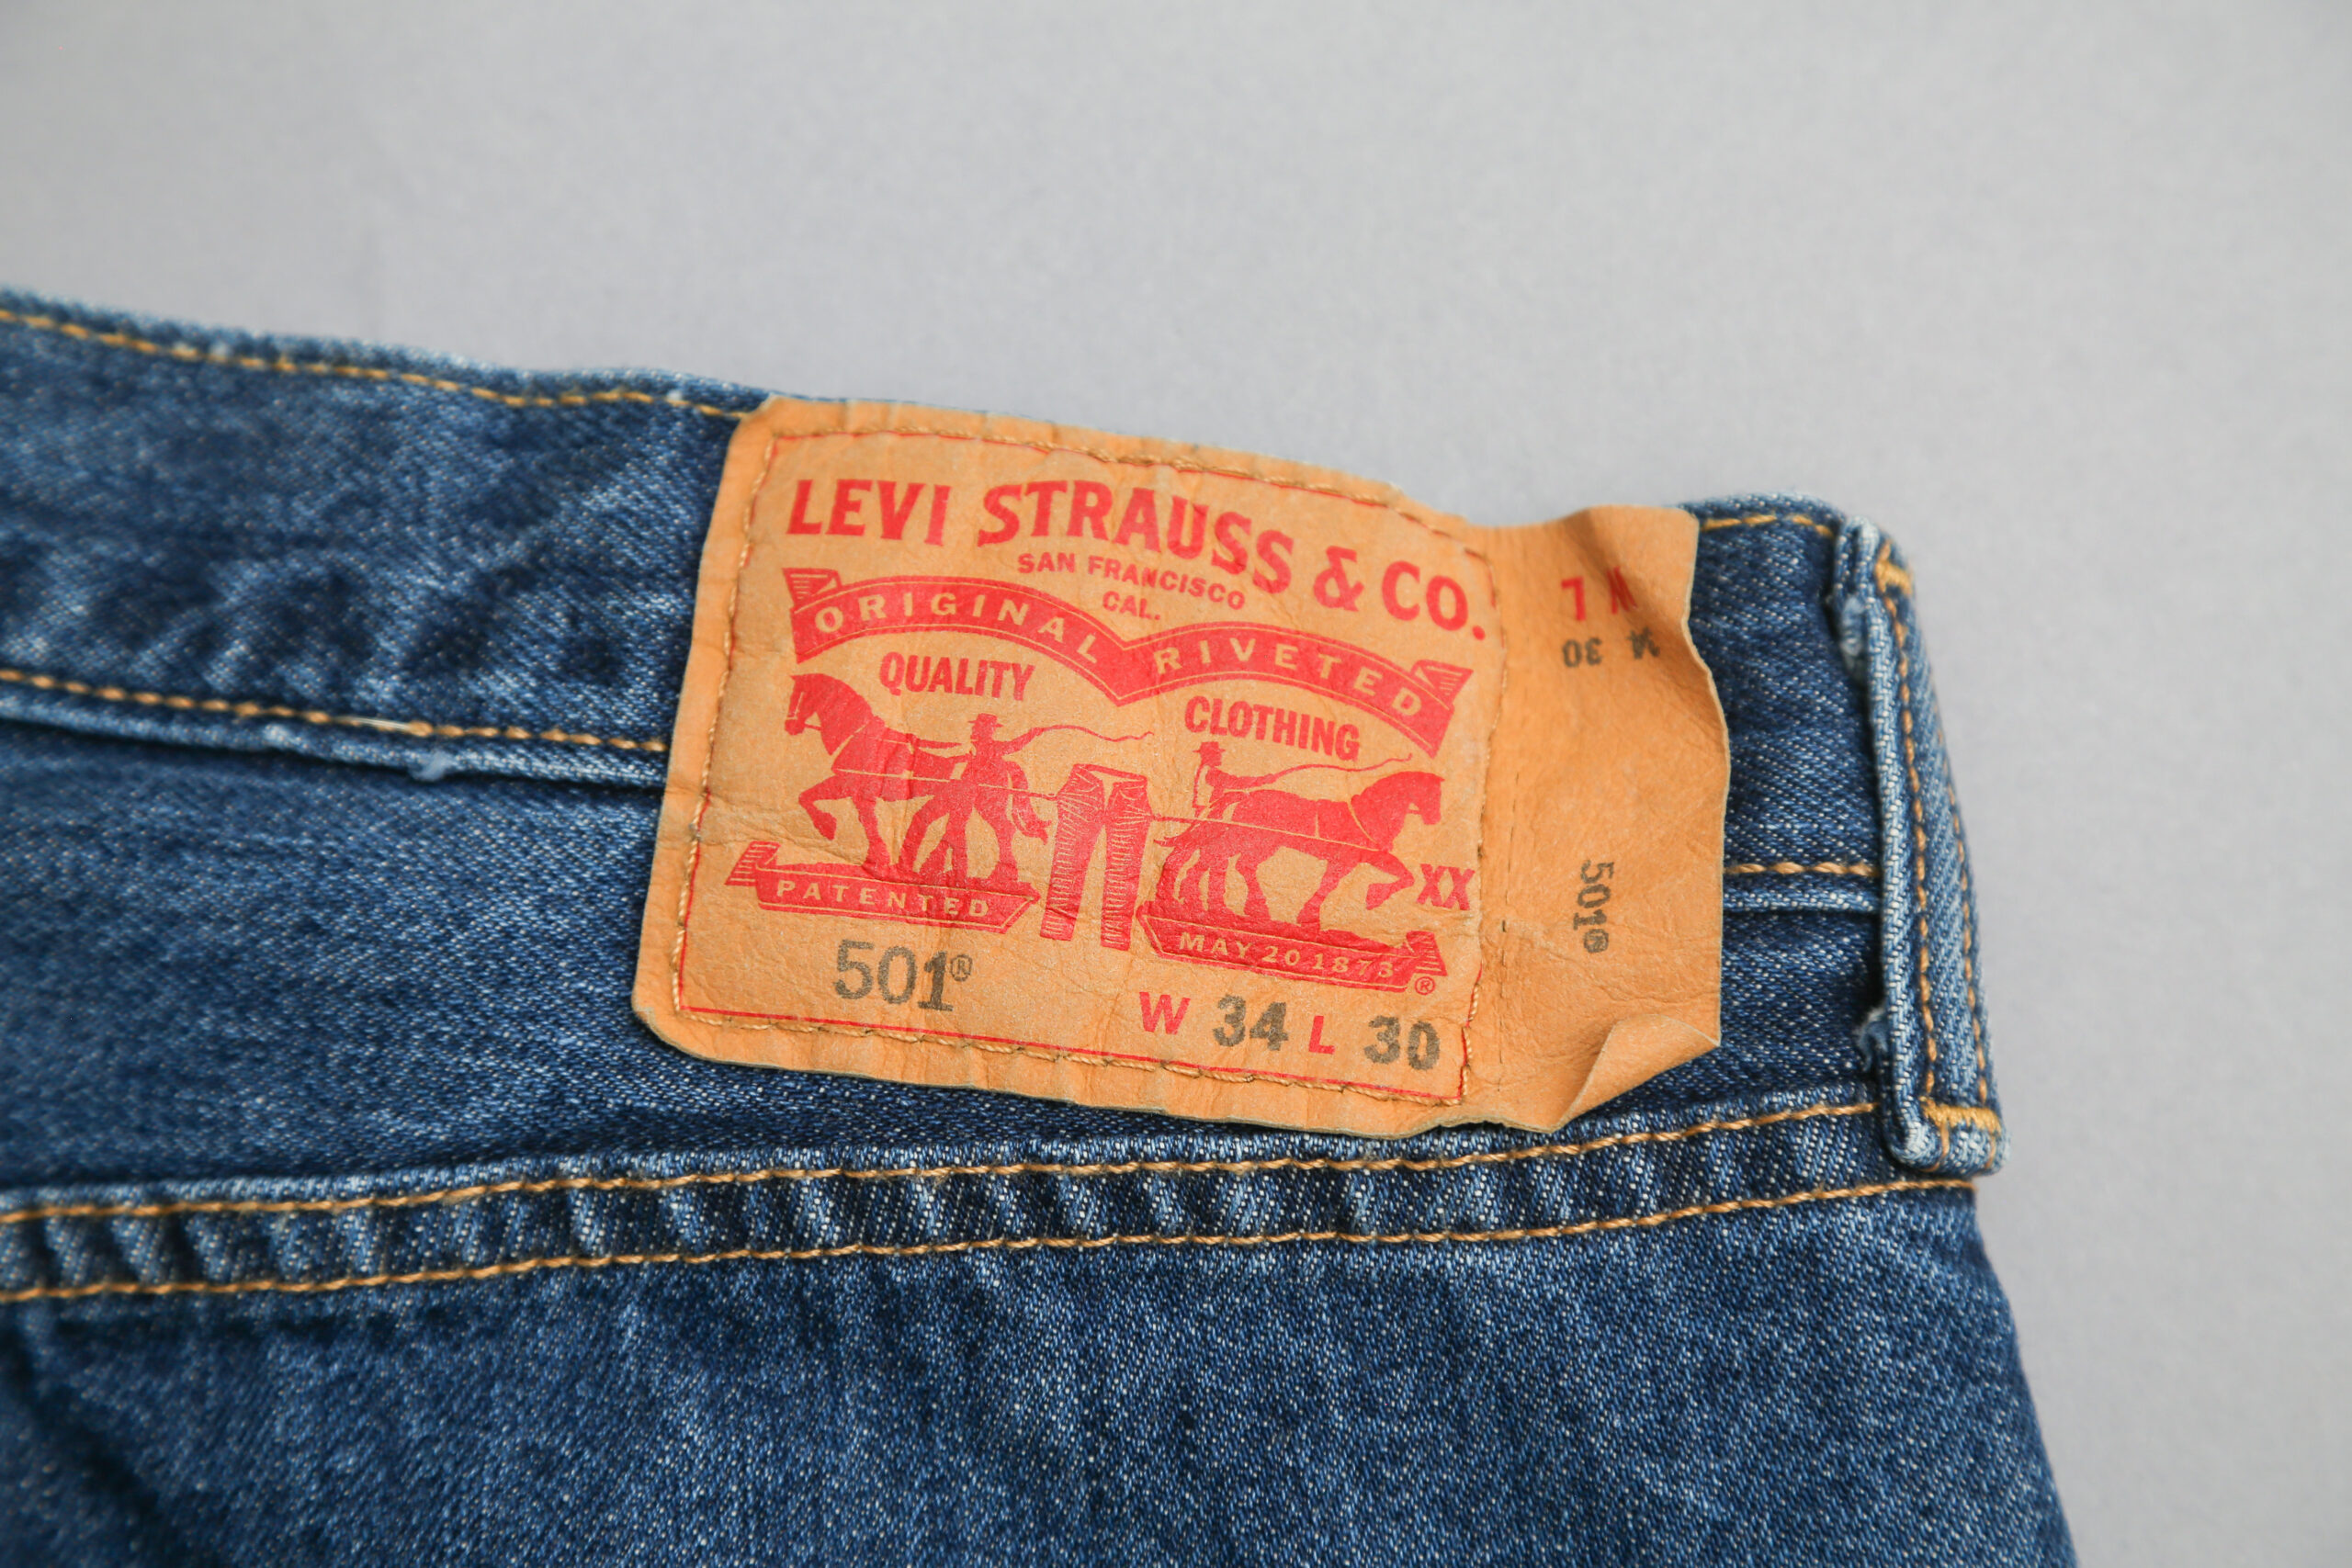 Levi's 501 tag on a pair of jeans on a plain background